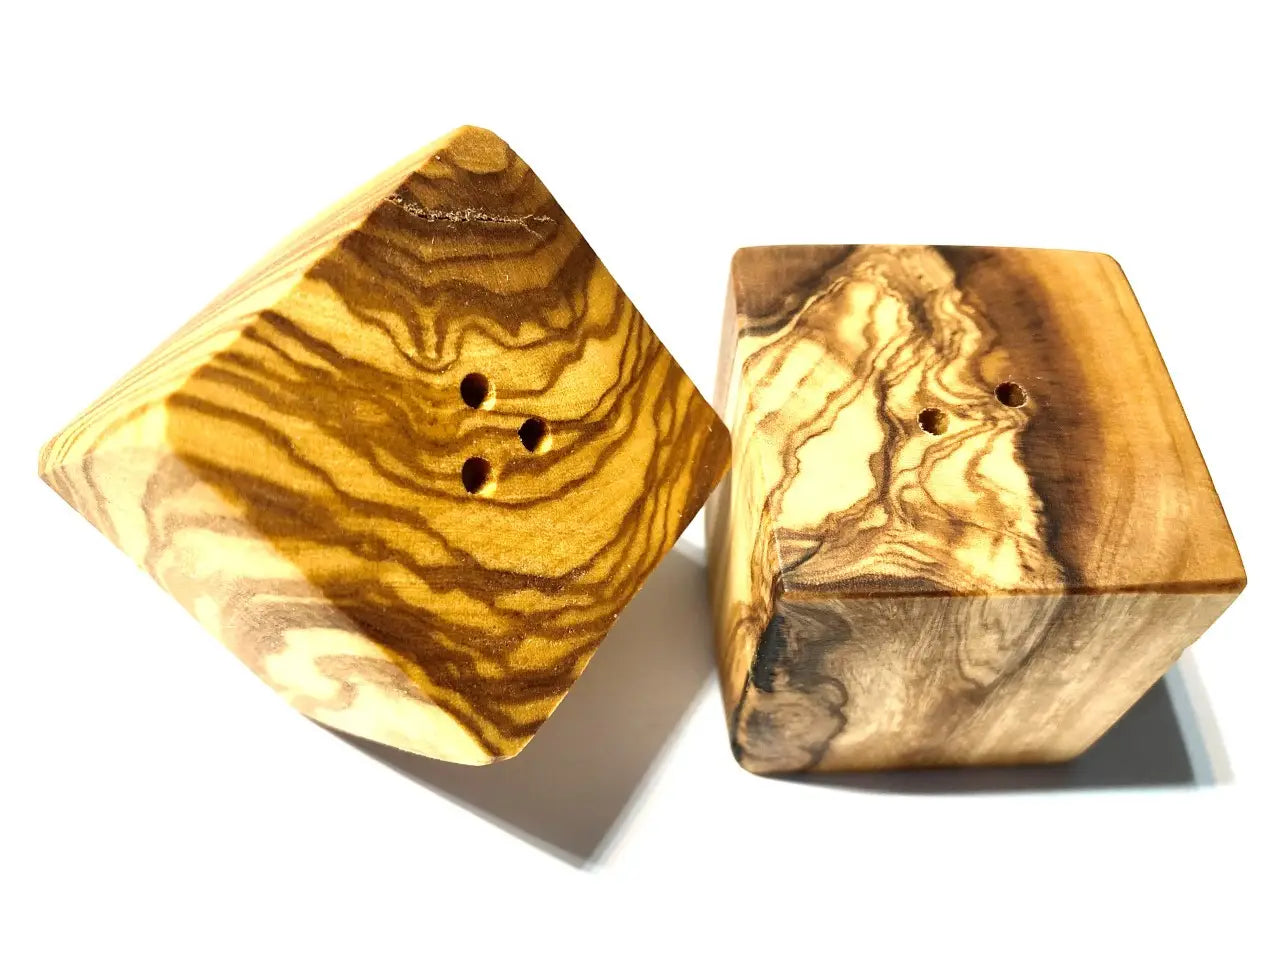 Olive Wood Salt and Pepper Shakers